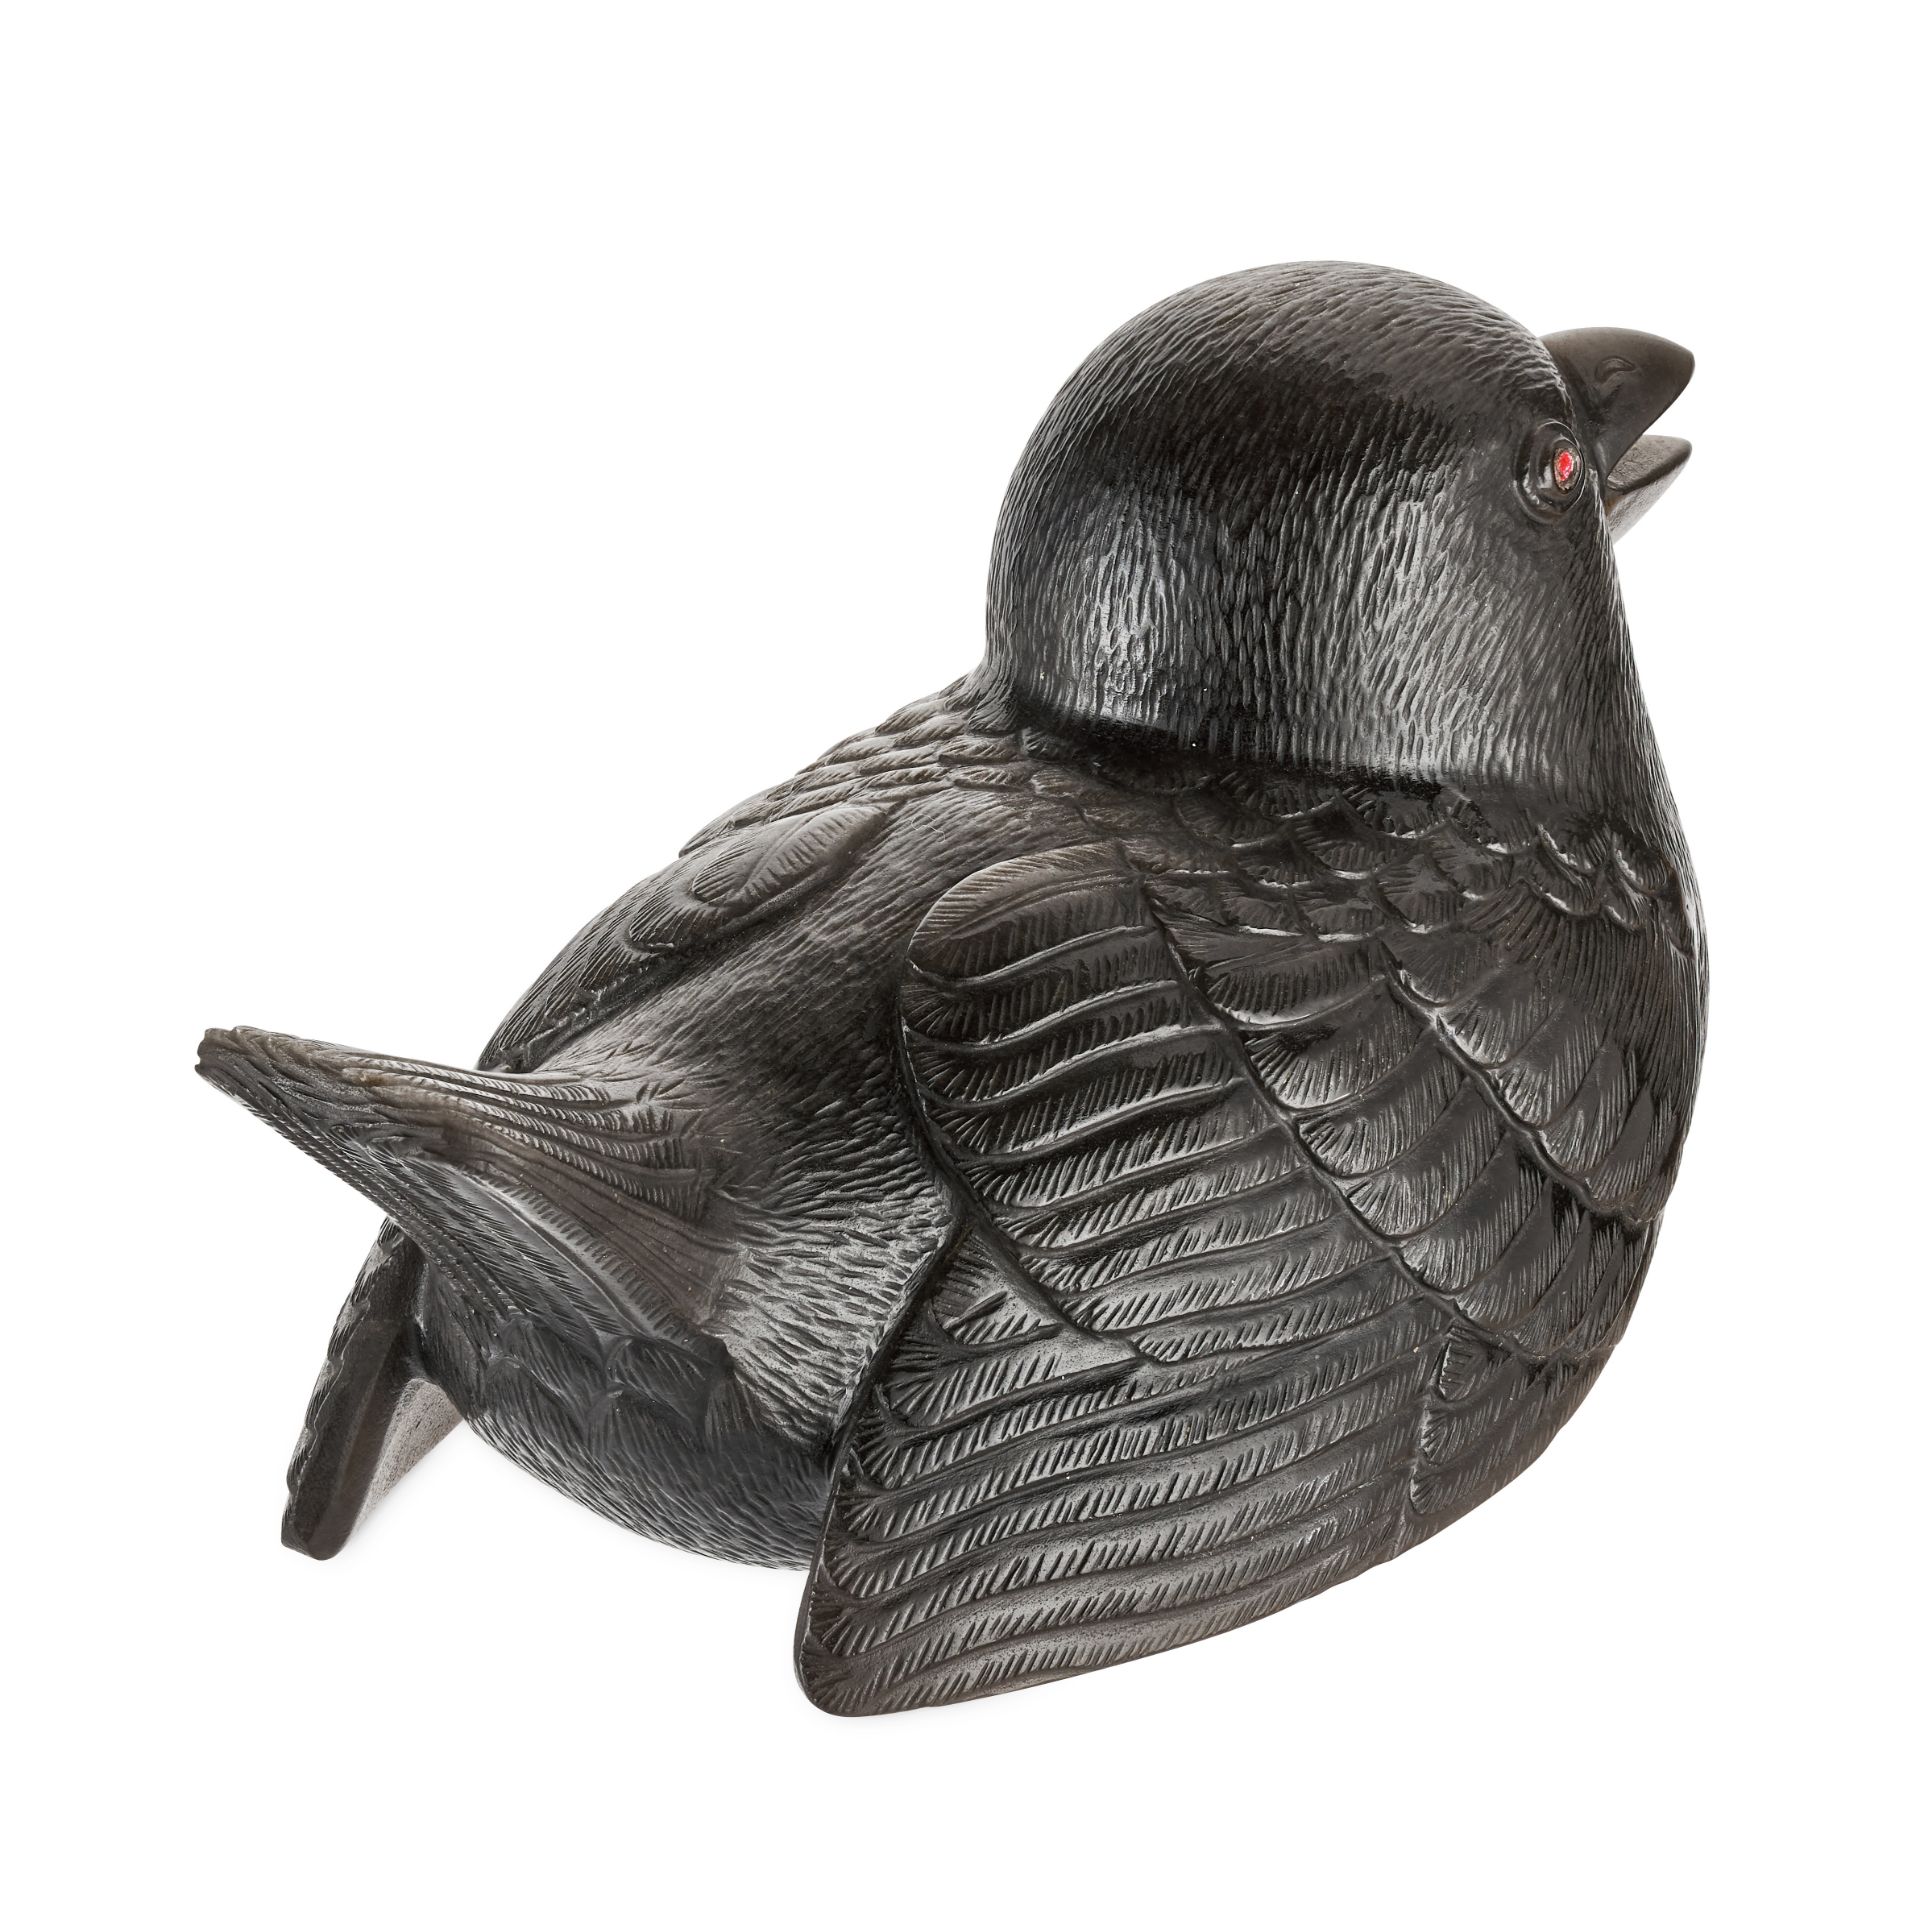 FABERGE, A LARGE AND IMPORTANT JEWELLED OBSIDIAN STUDY OF A DUSTBATHING SPARROW, ST PETERSBURG, C... - Image 8 of 13